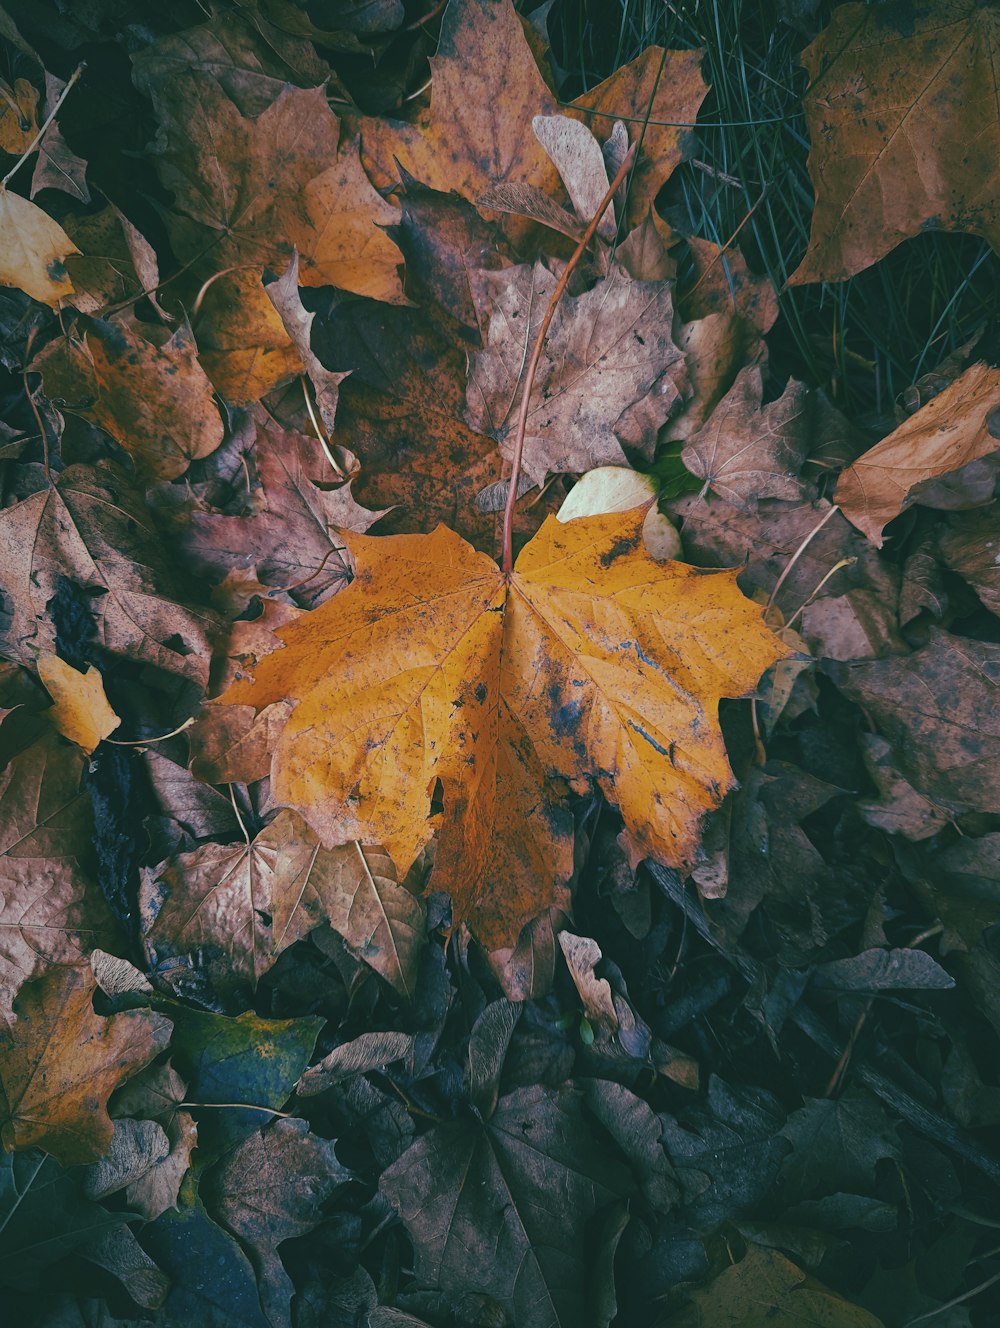 a yellow leaf laying on top of a pile of leaves